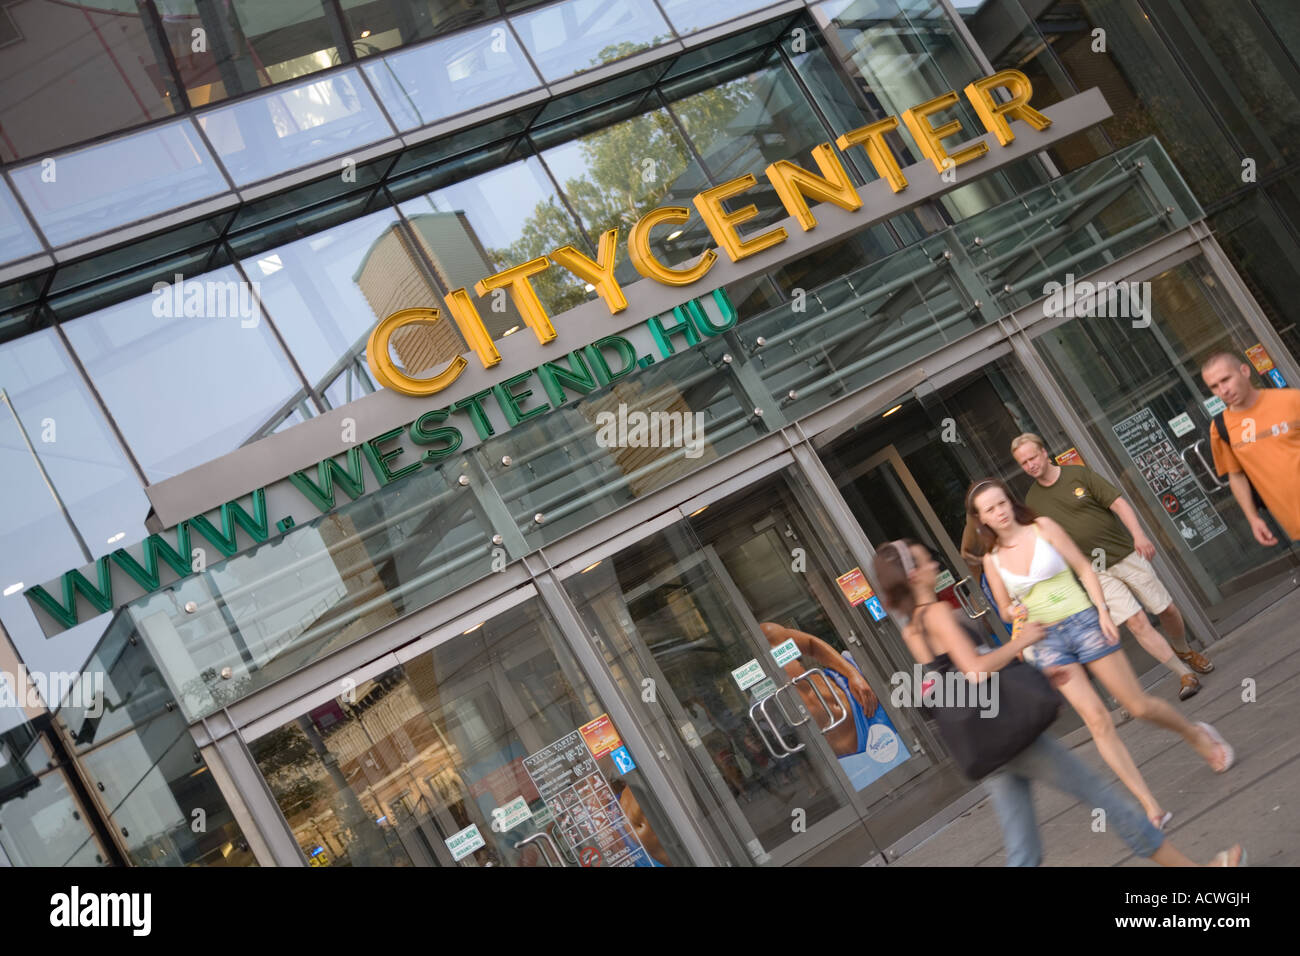 WestEnd CityCenter shopping centre in Budapest Stock Photo